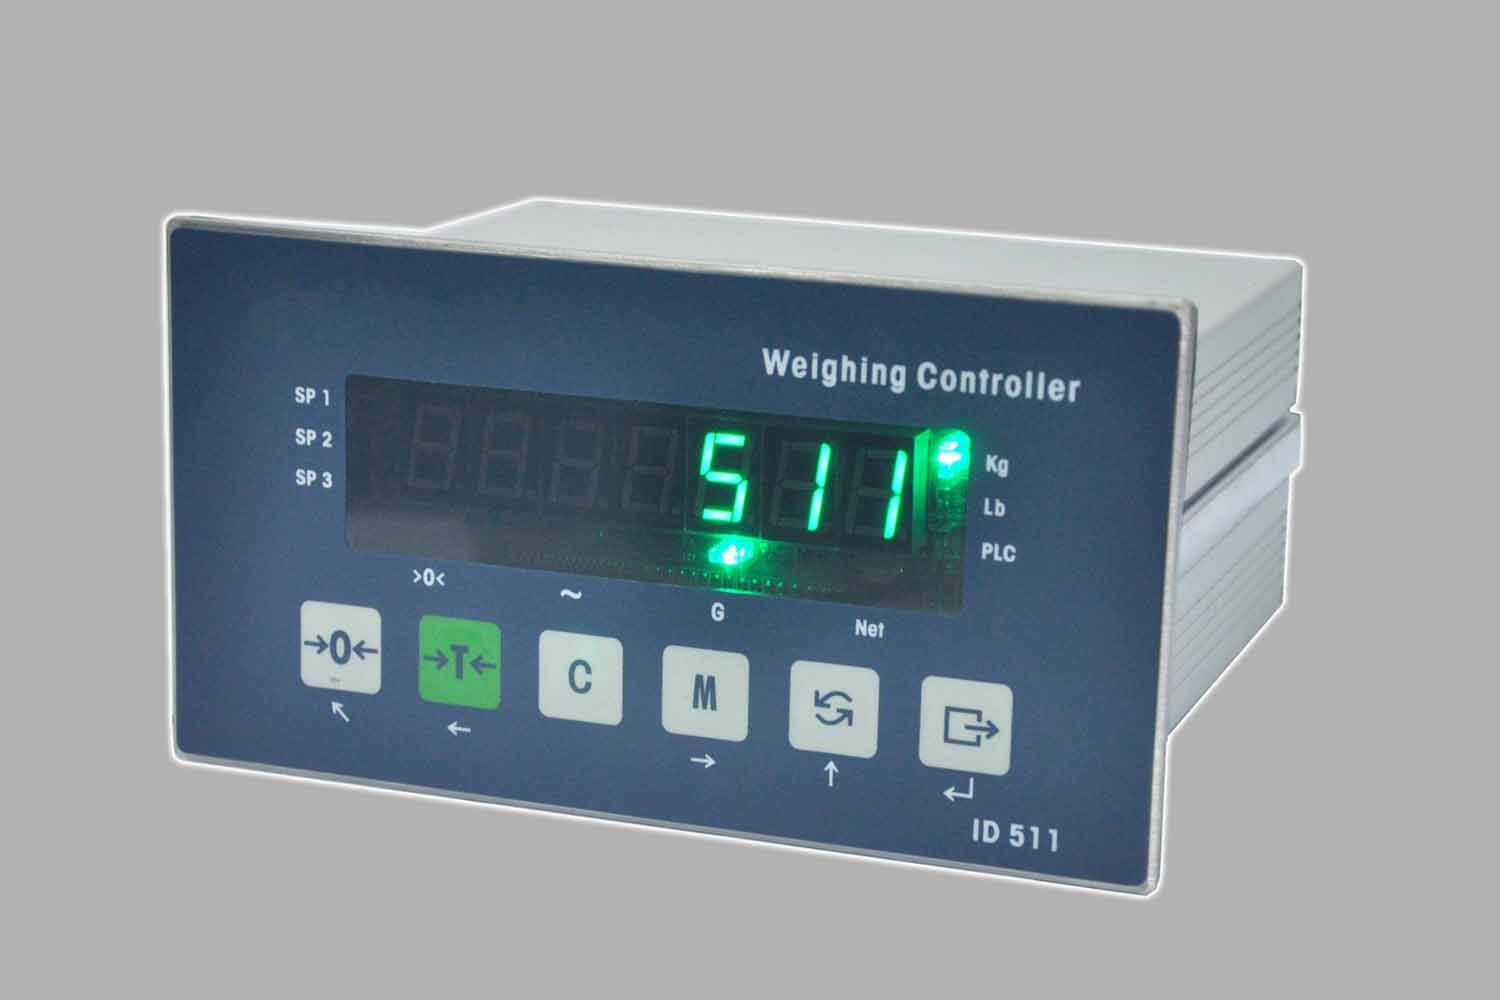 High Precision Digital Weighing Controller With Rich Communication Interfaces